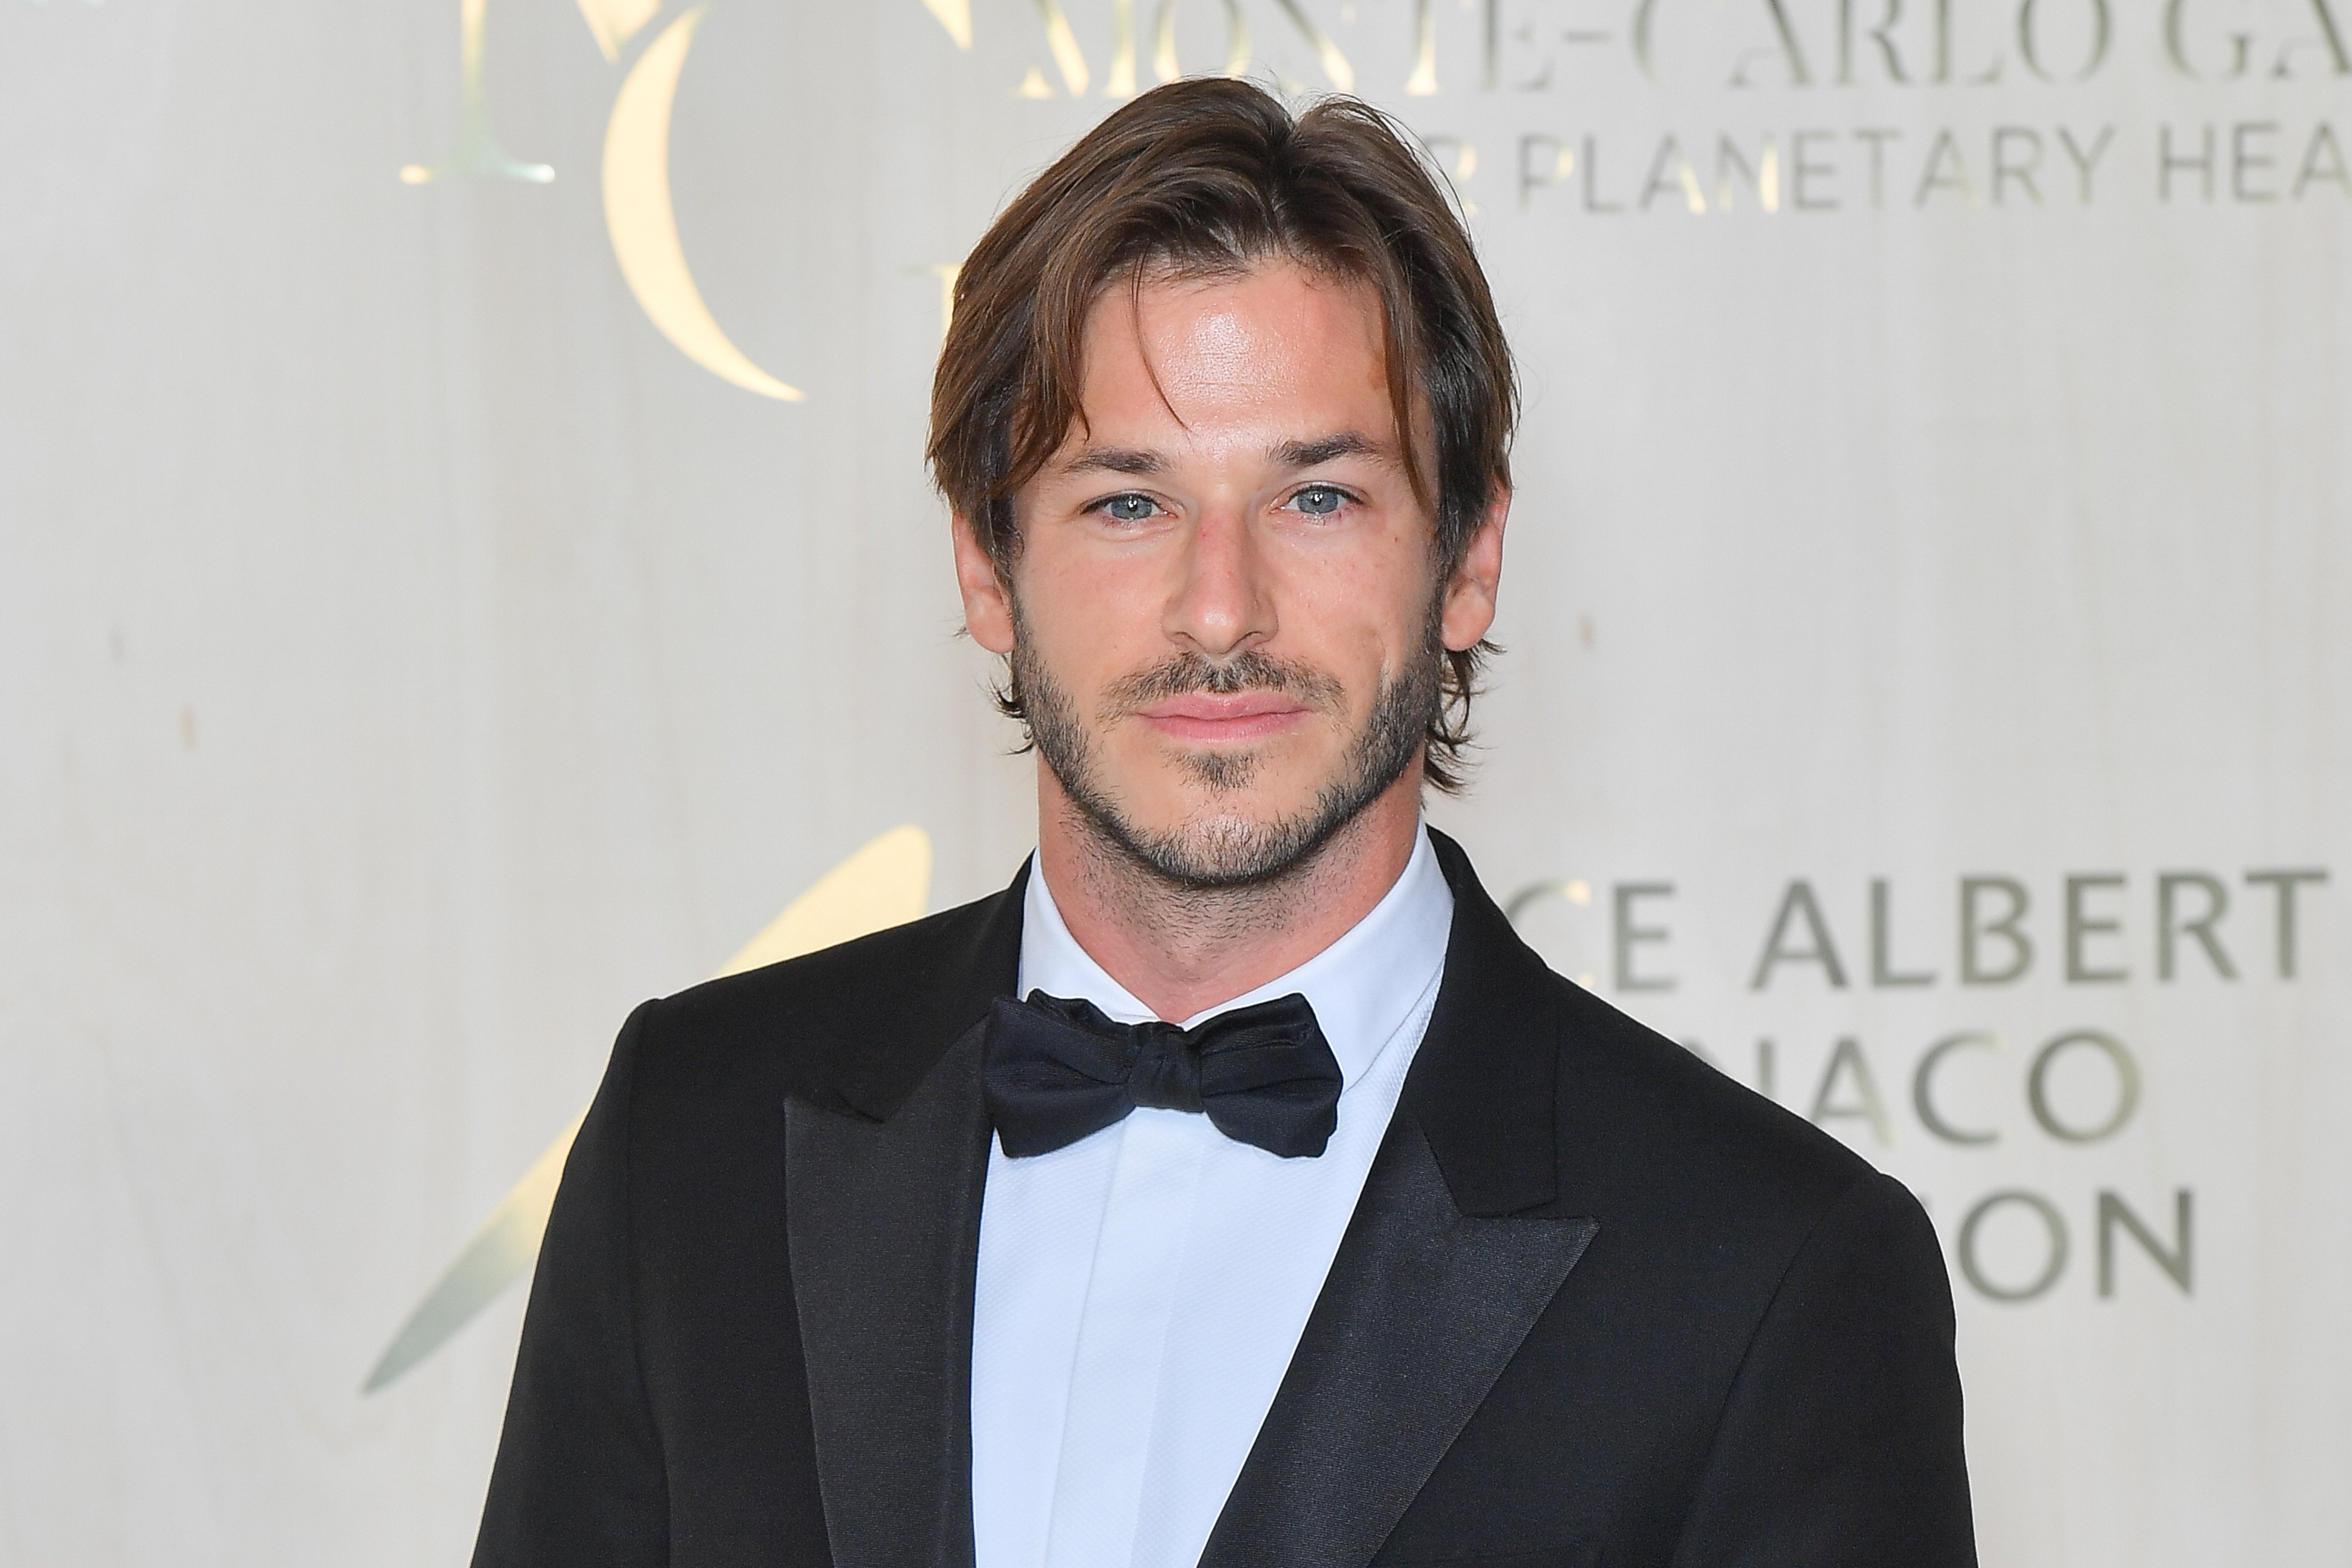 Gaspard Ulliel dressed in a tuxedo at a photocall during the 5th Monte-Carlo Gala